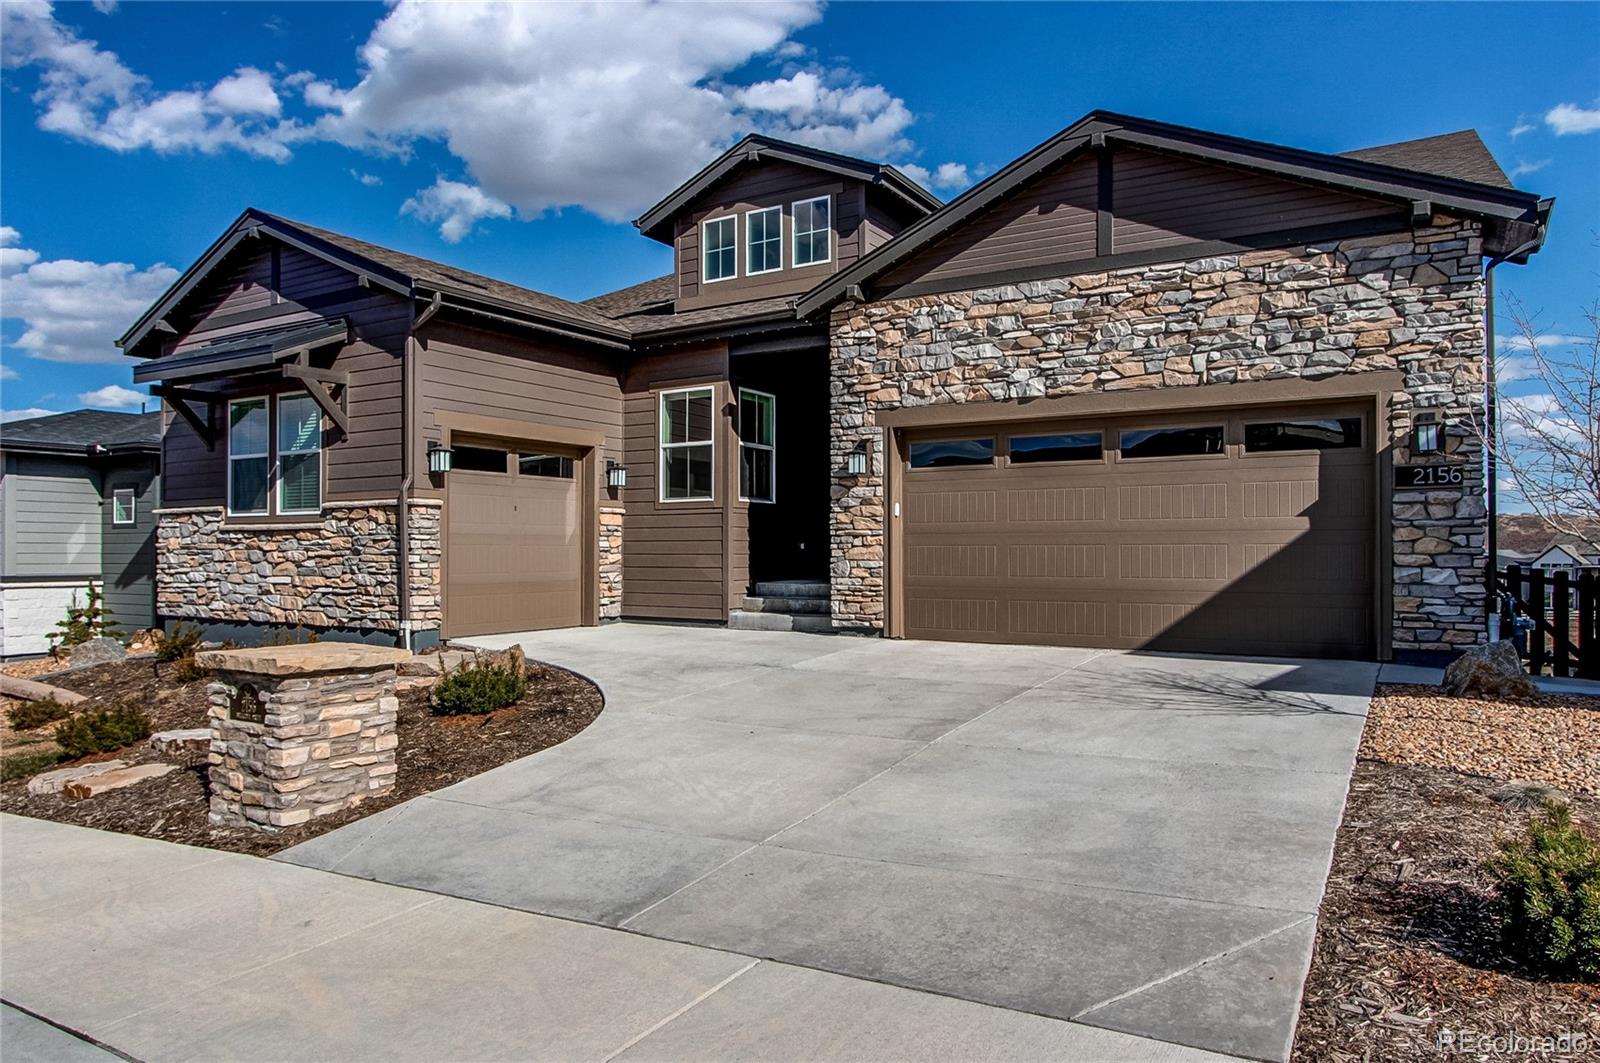 2156  Bellcove Drive, castle pines MLS: 5513648 Beds: 3 Baths: 4 Price: $1,299,500